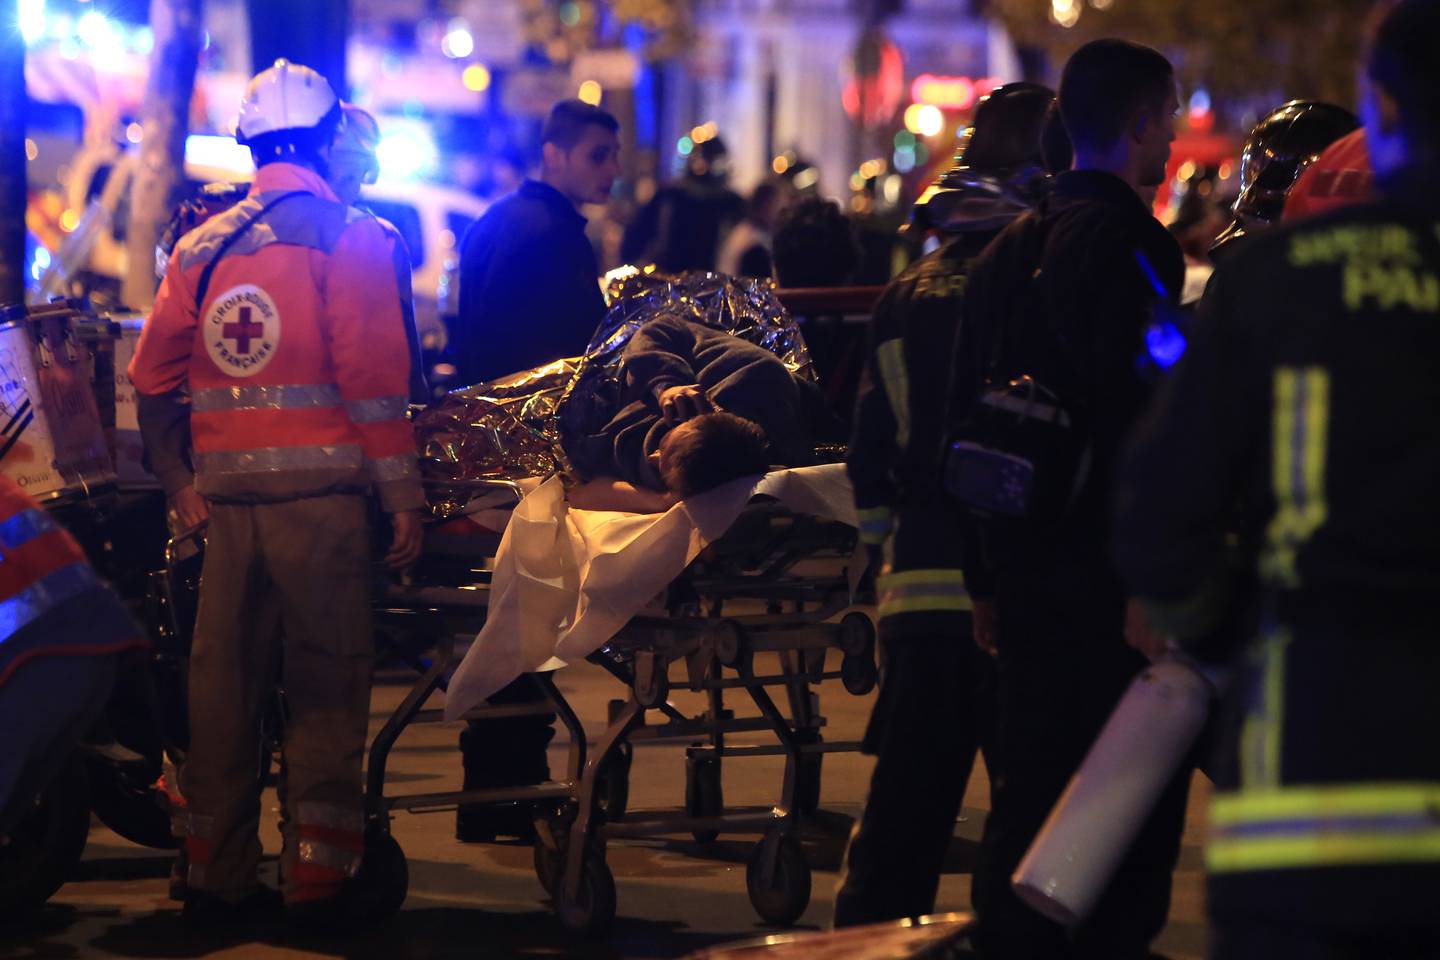 The aftermath of the shooting outside the Bataclan theatre in Paris in 2015. AP Photo